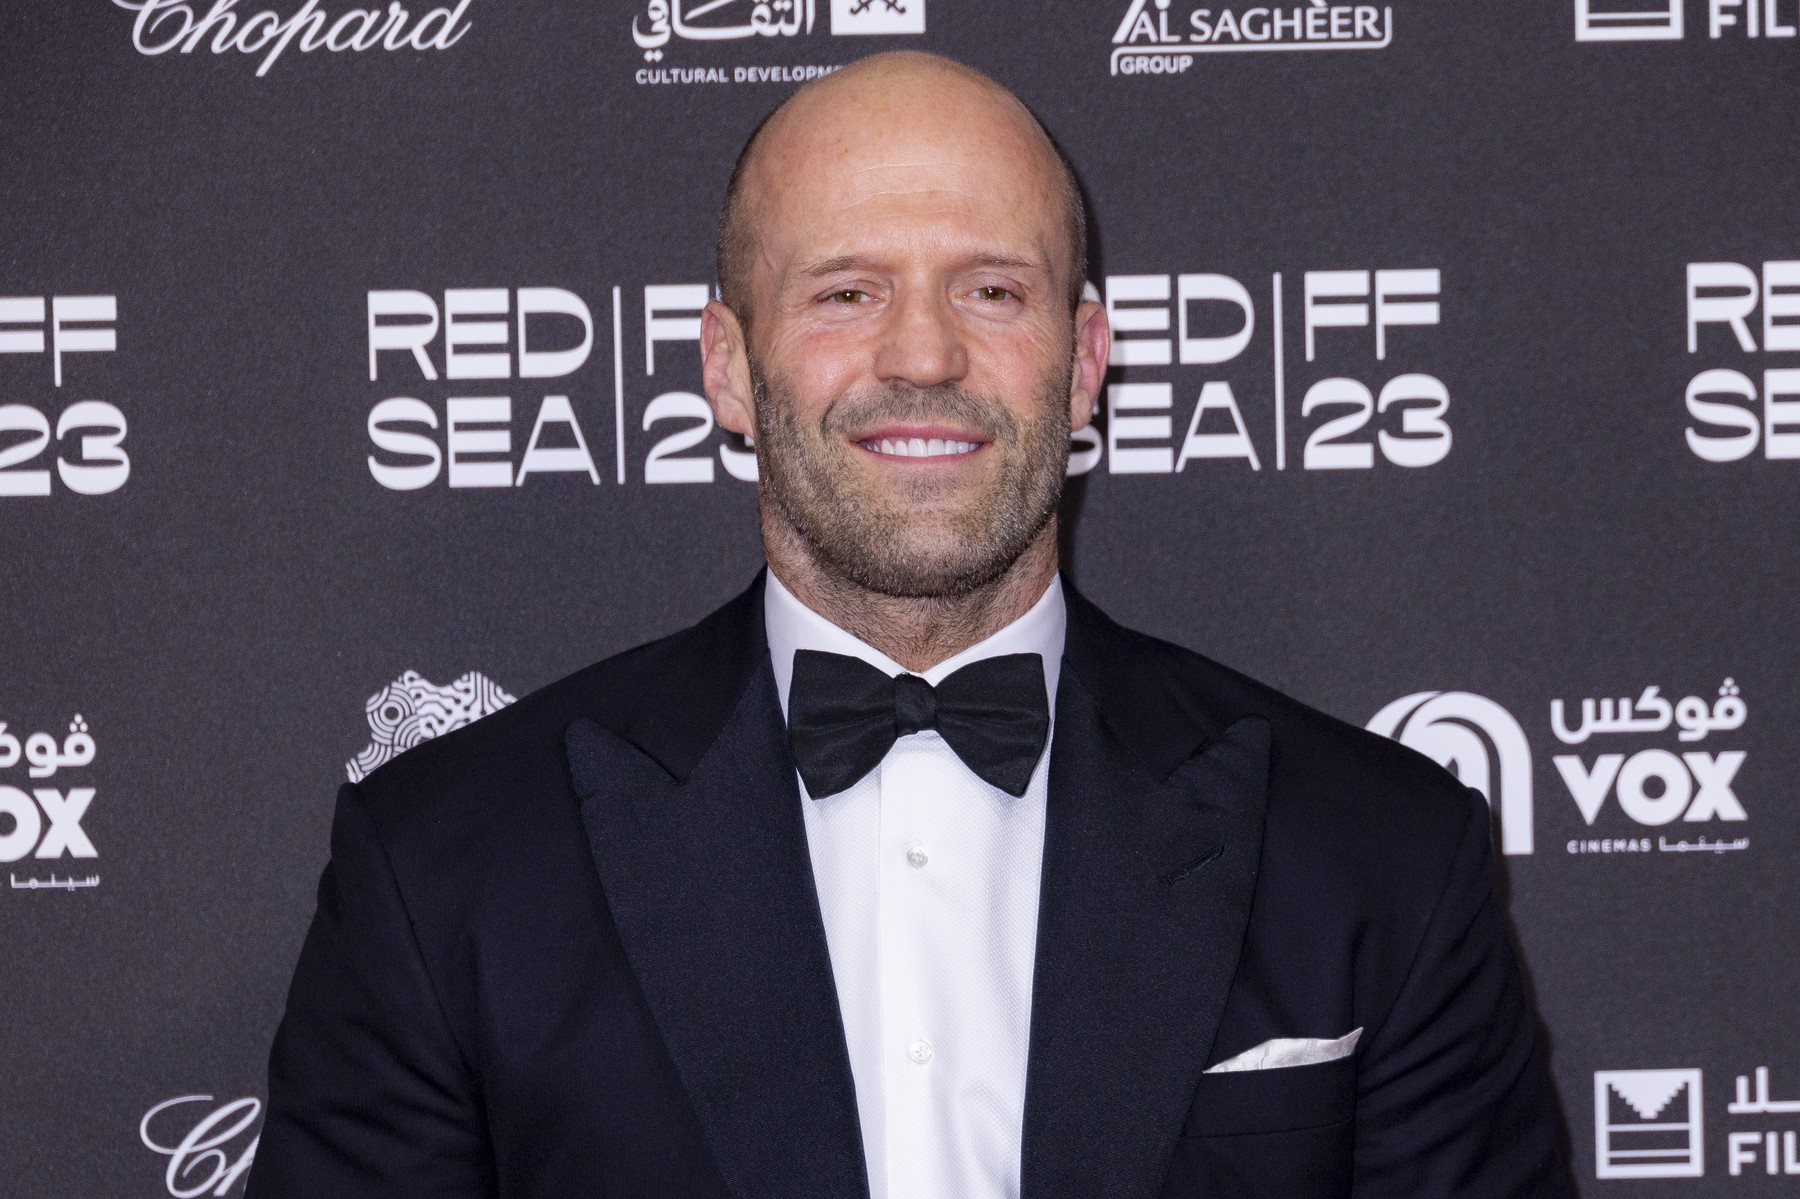 This is what Jason Statham said about the people of Best, the action star said about our capital